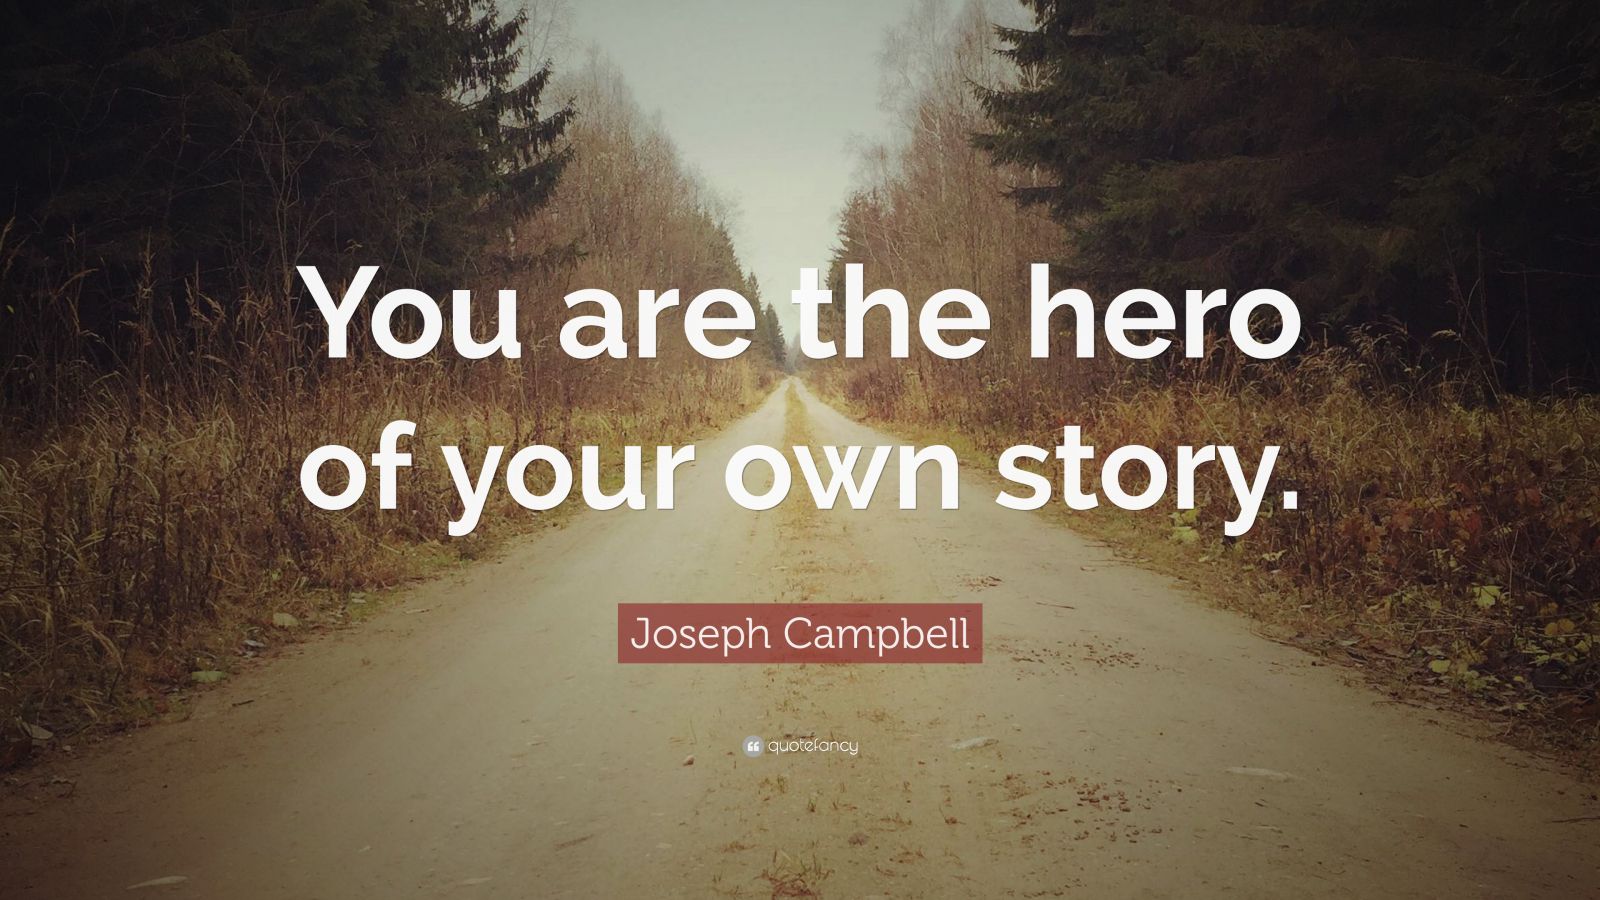 6361211 Joseph Campbell Quote You are the hero of your own story